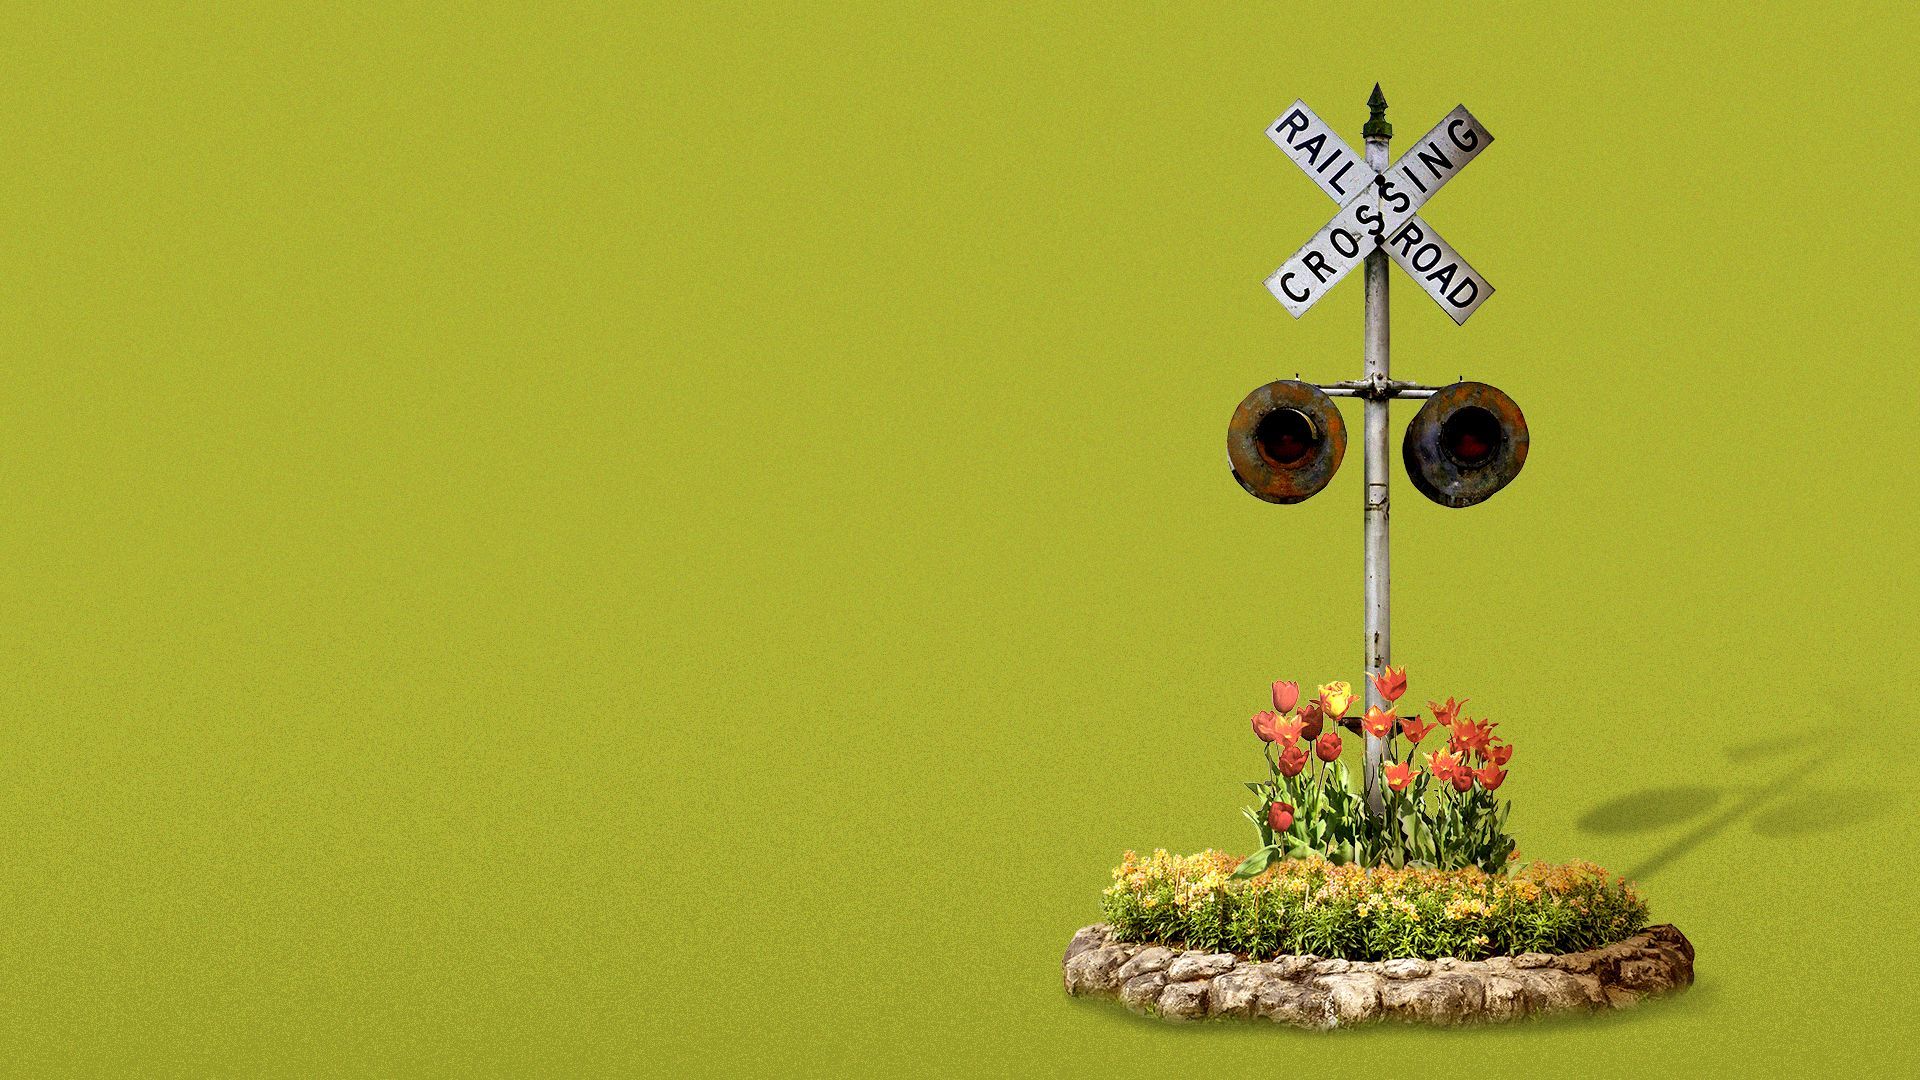 Illustration of a railroad crossing sign standing in a flower bed.